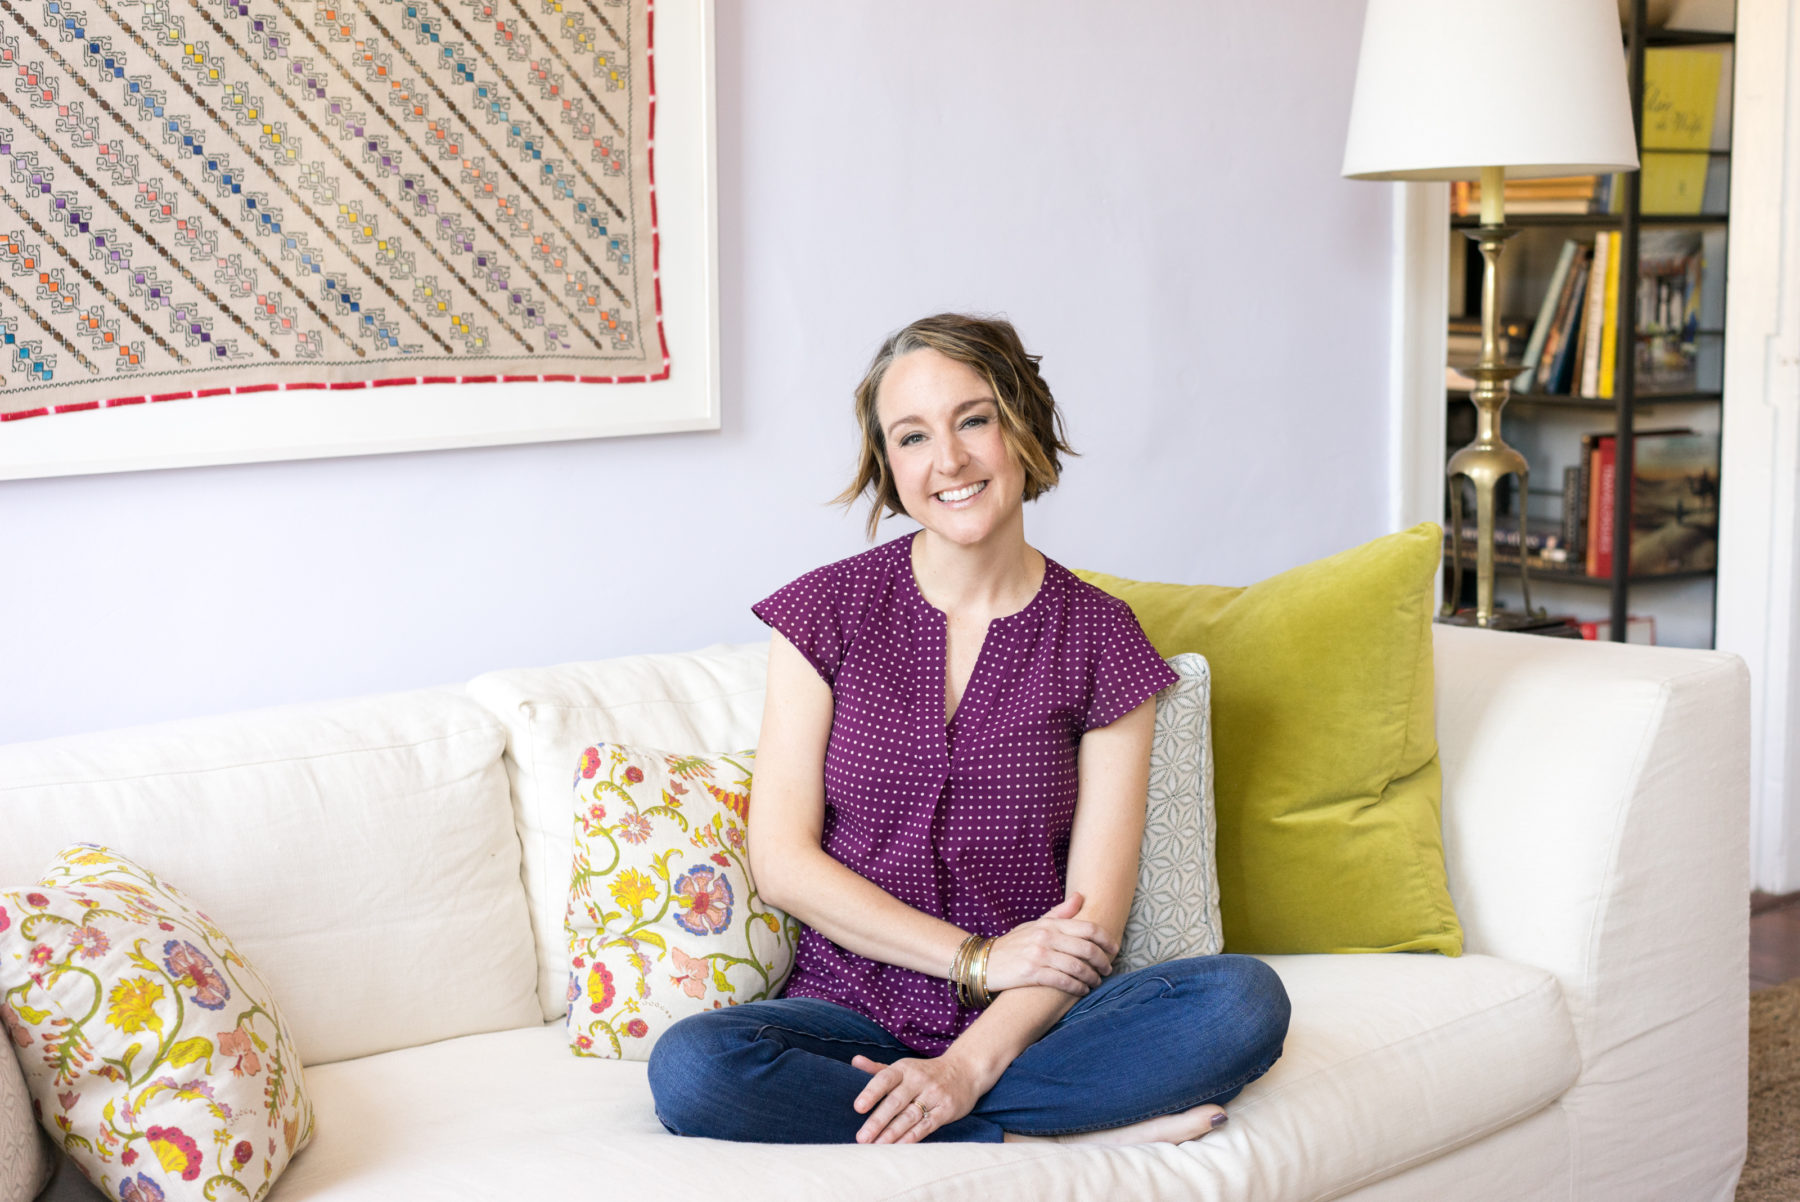 A lifestyle headshot of an interior designer sitting on a couch